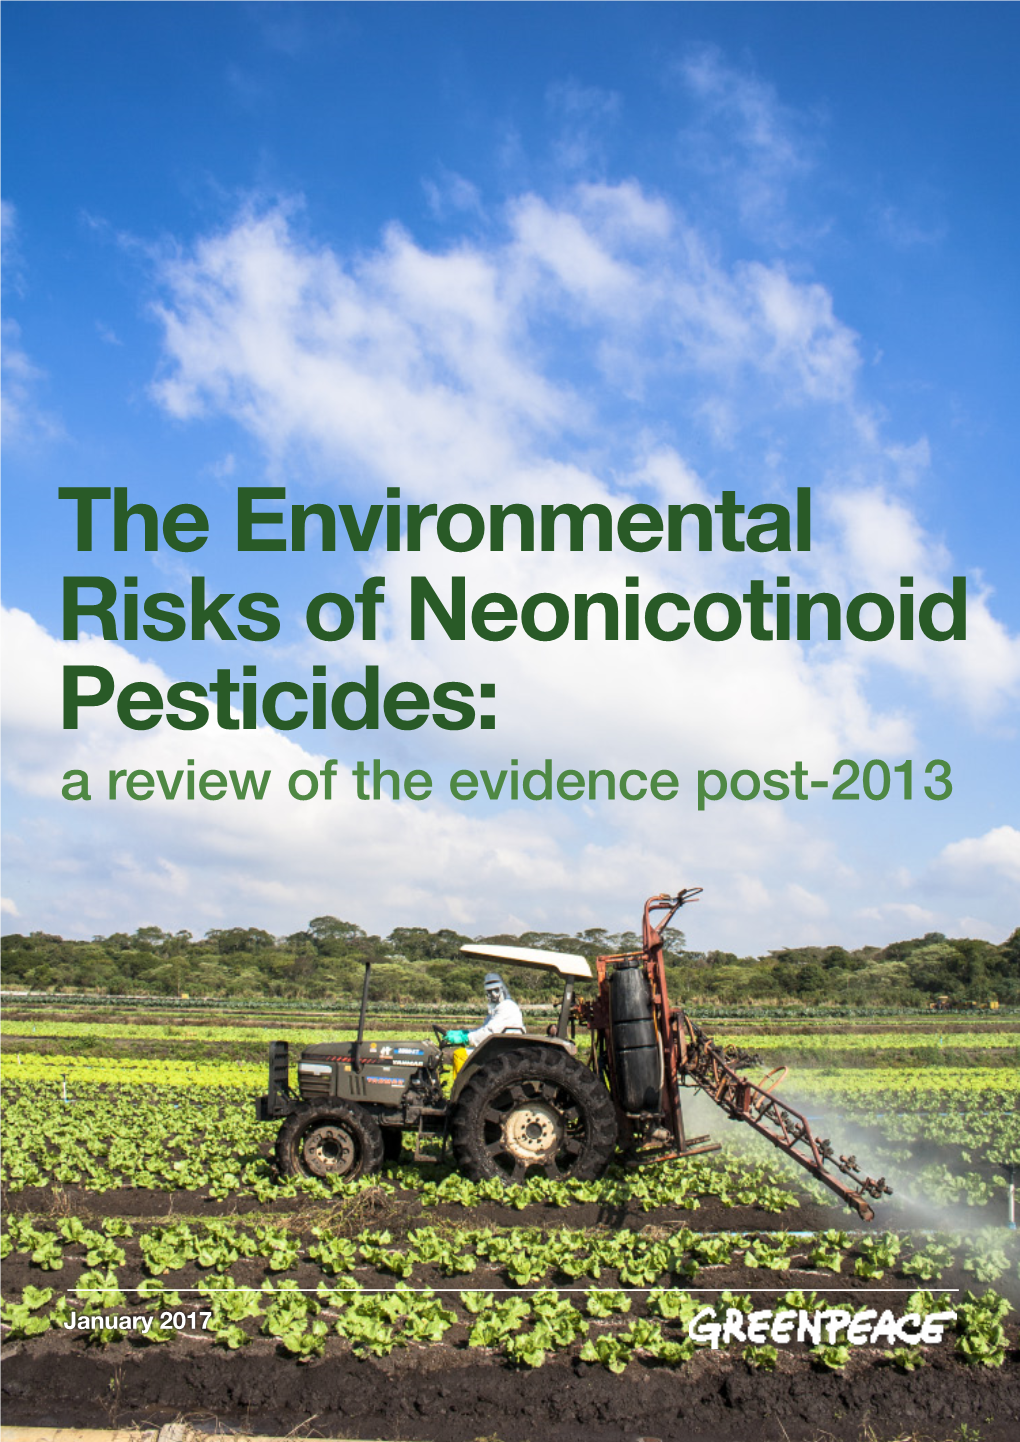 The Environmental Risks of Neonicotinoid Pesticides: a Review of the Evidence Post-2013